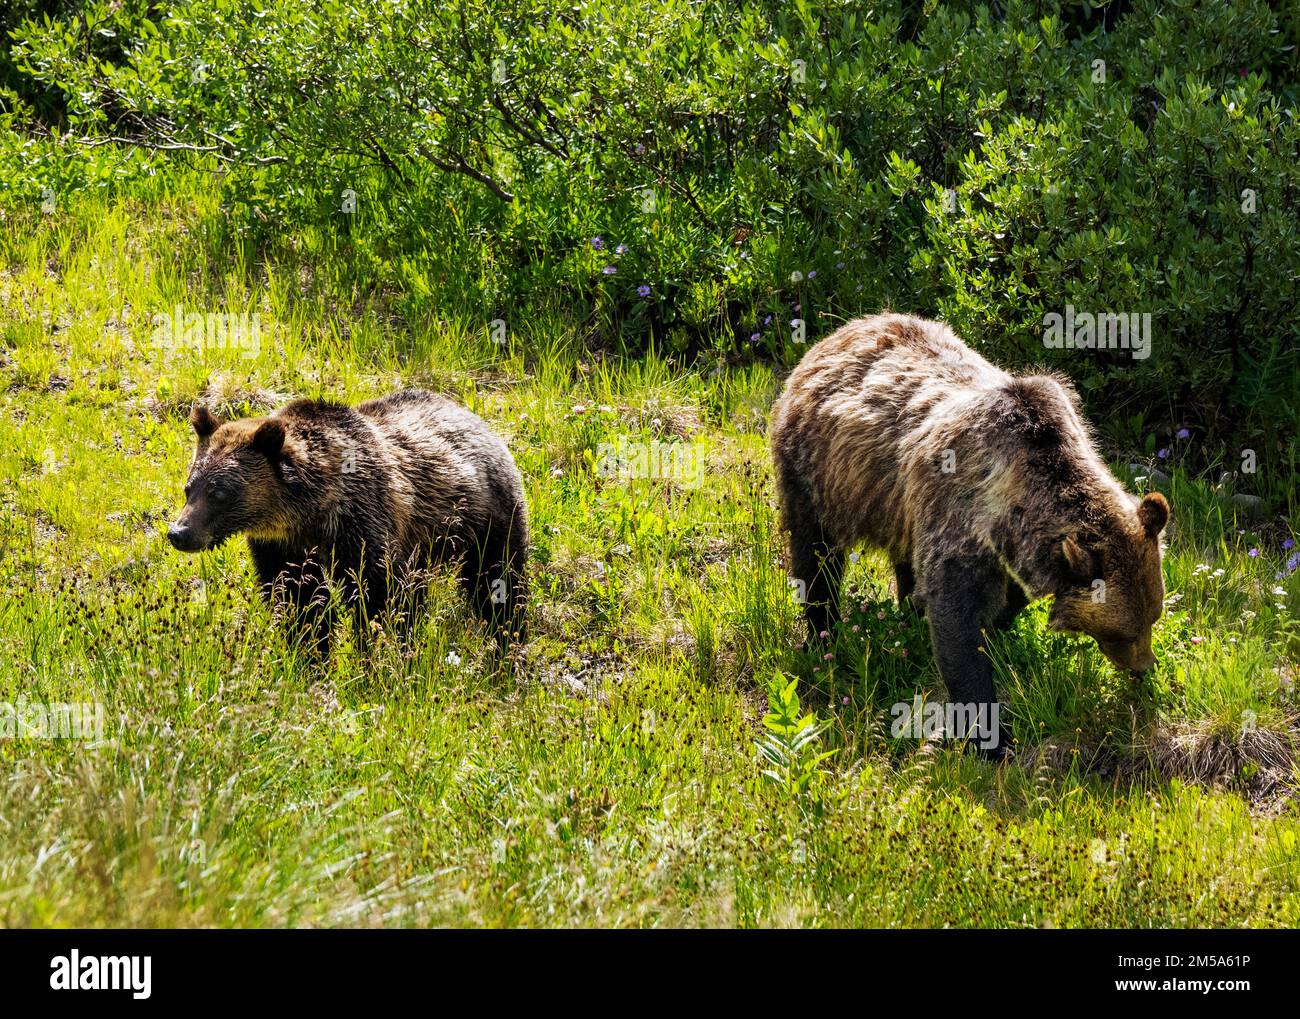 Female (Sow) Grizzly bear (Ursus arctos horribilis), with yearling cub; Togwotee Pass; 9,655 feet; Continental Divide; Absaroka Mountains; Wyoming; US Stock Photo